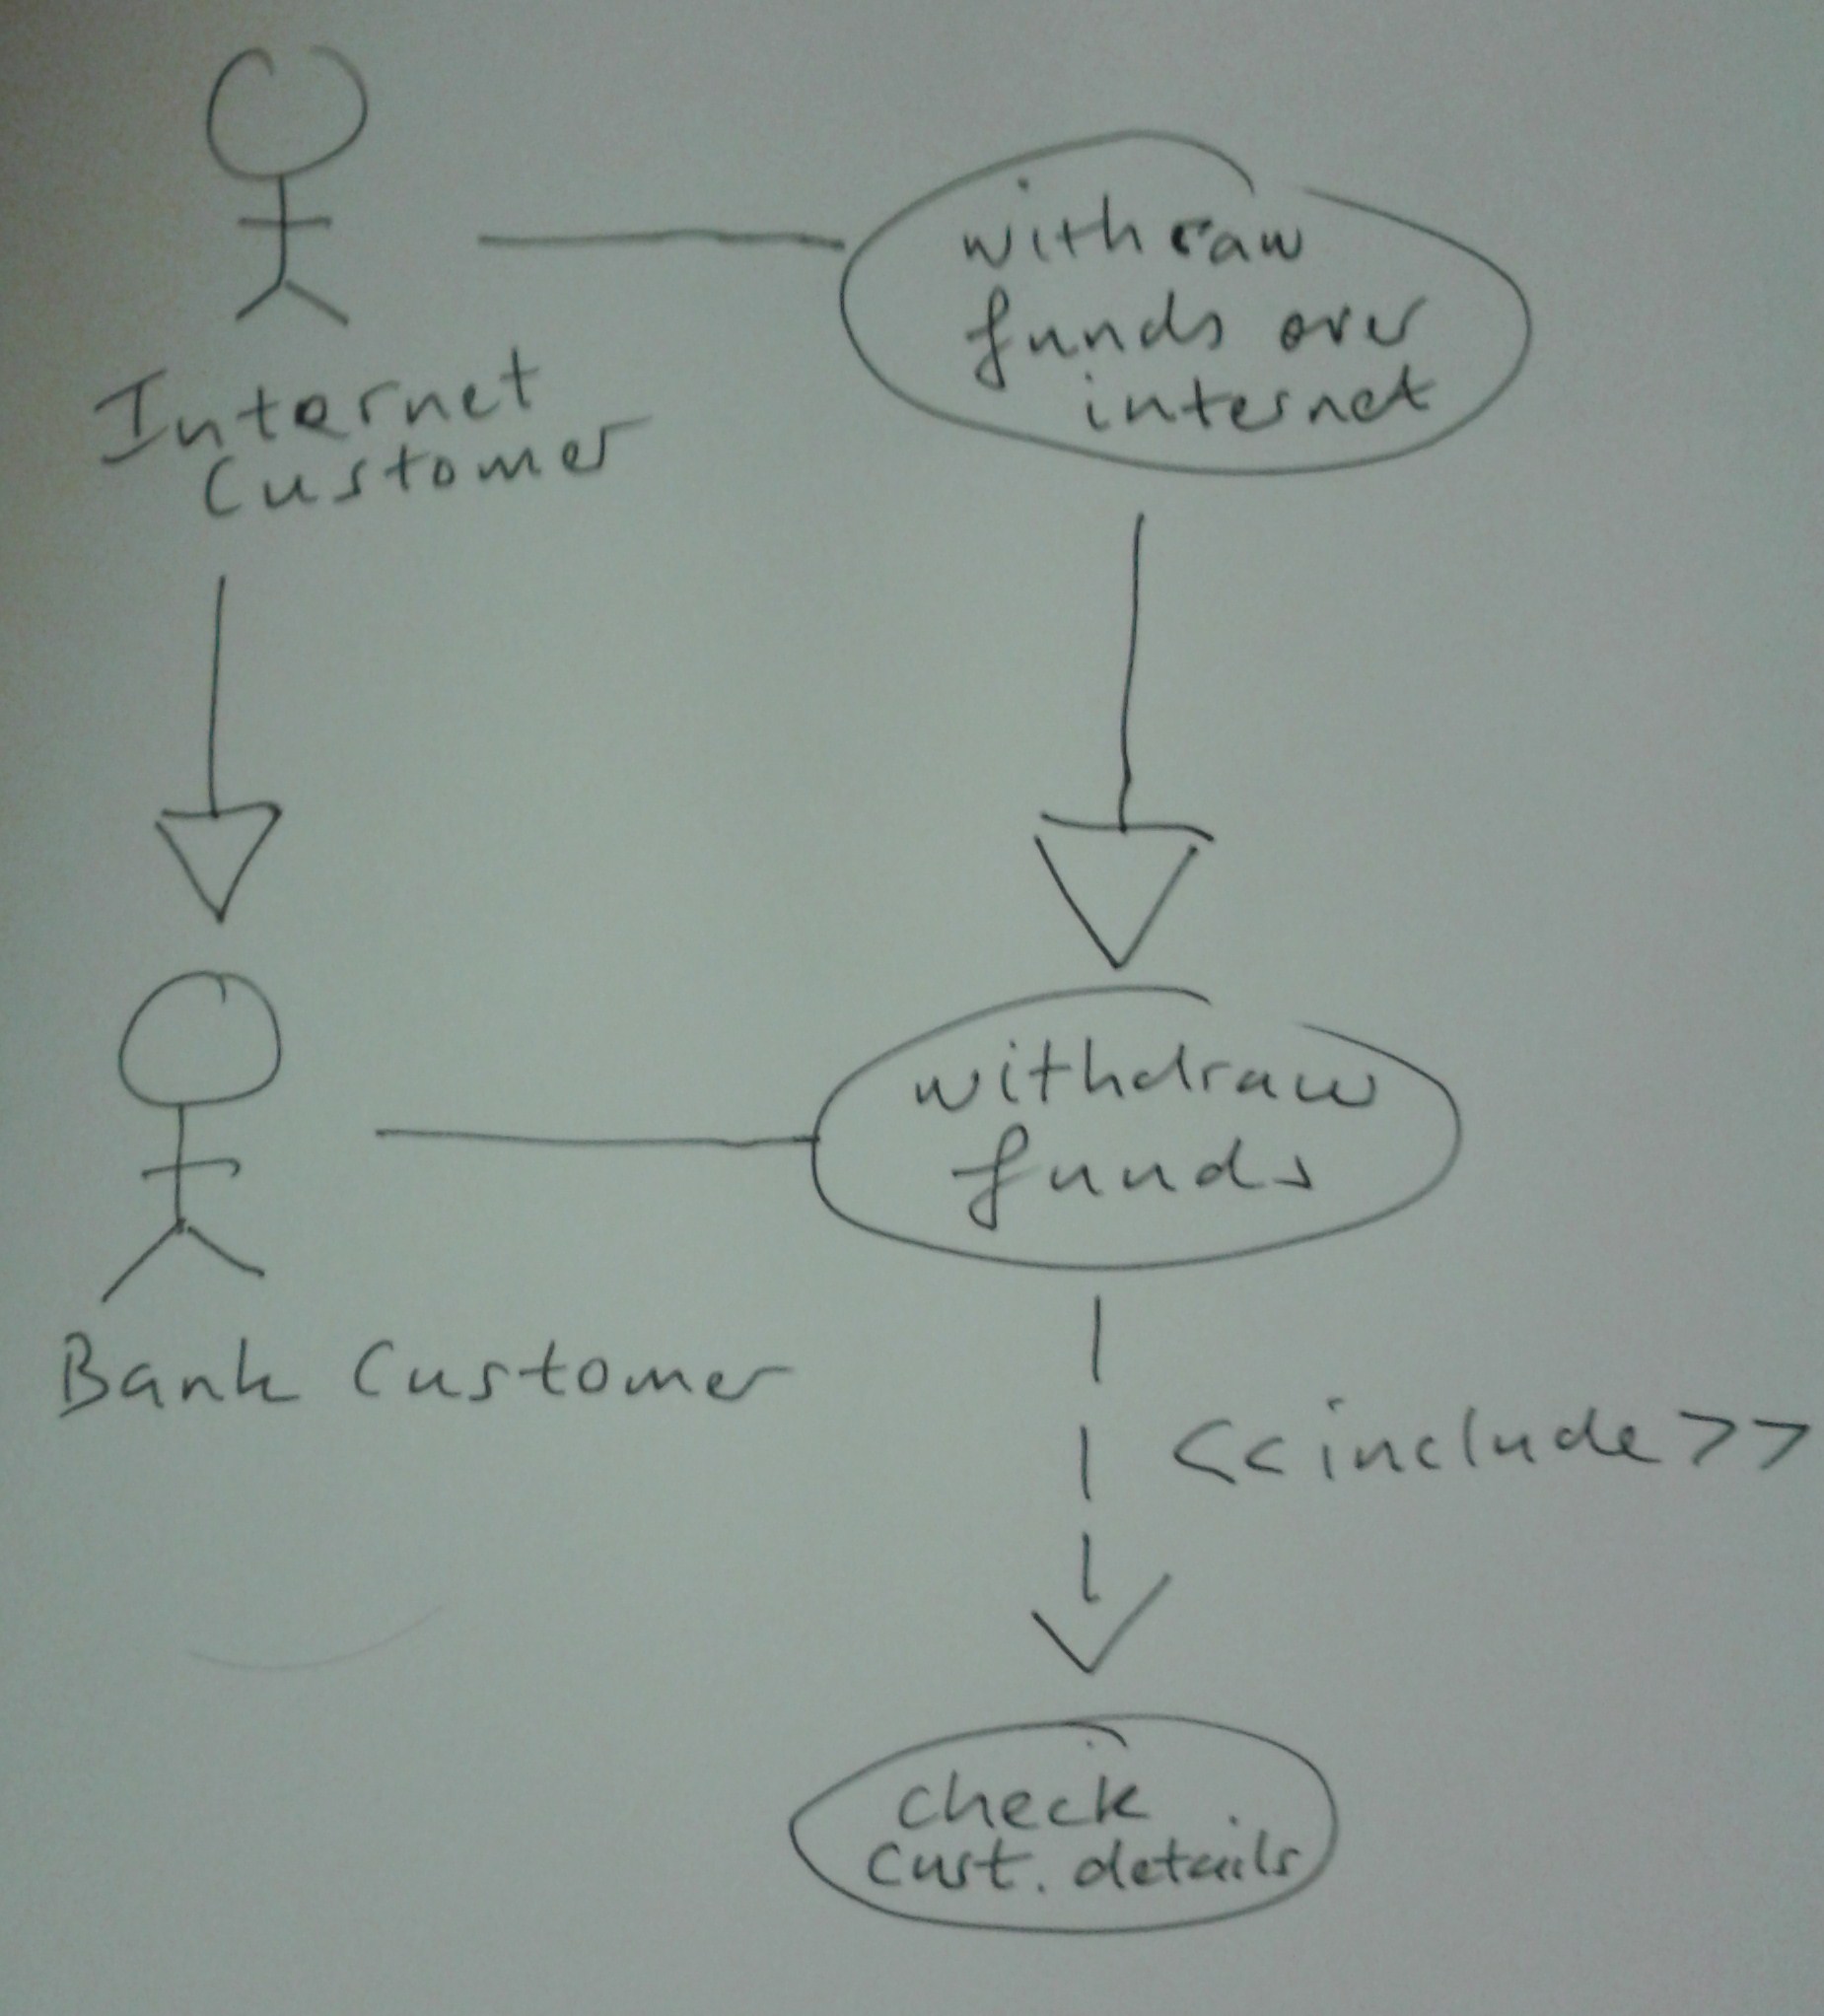 how to make use case diagram online